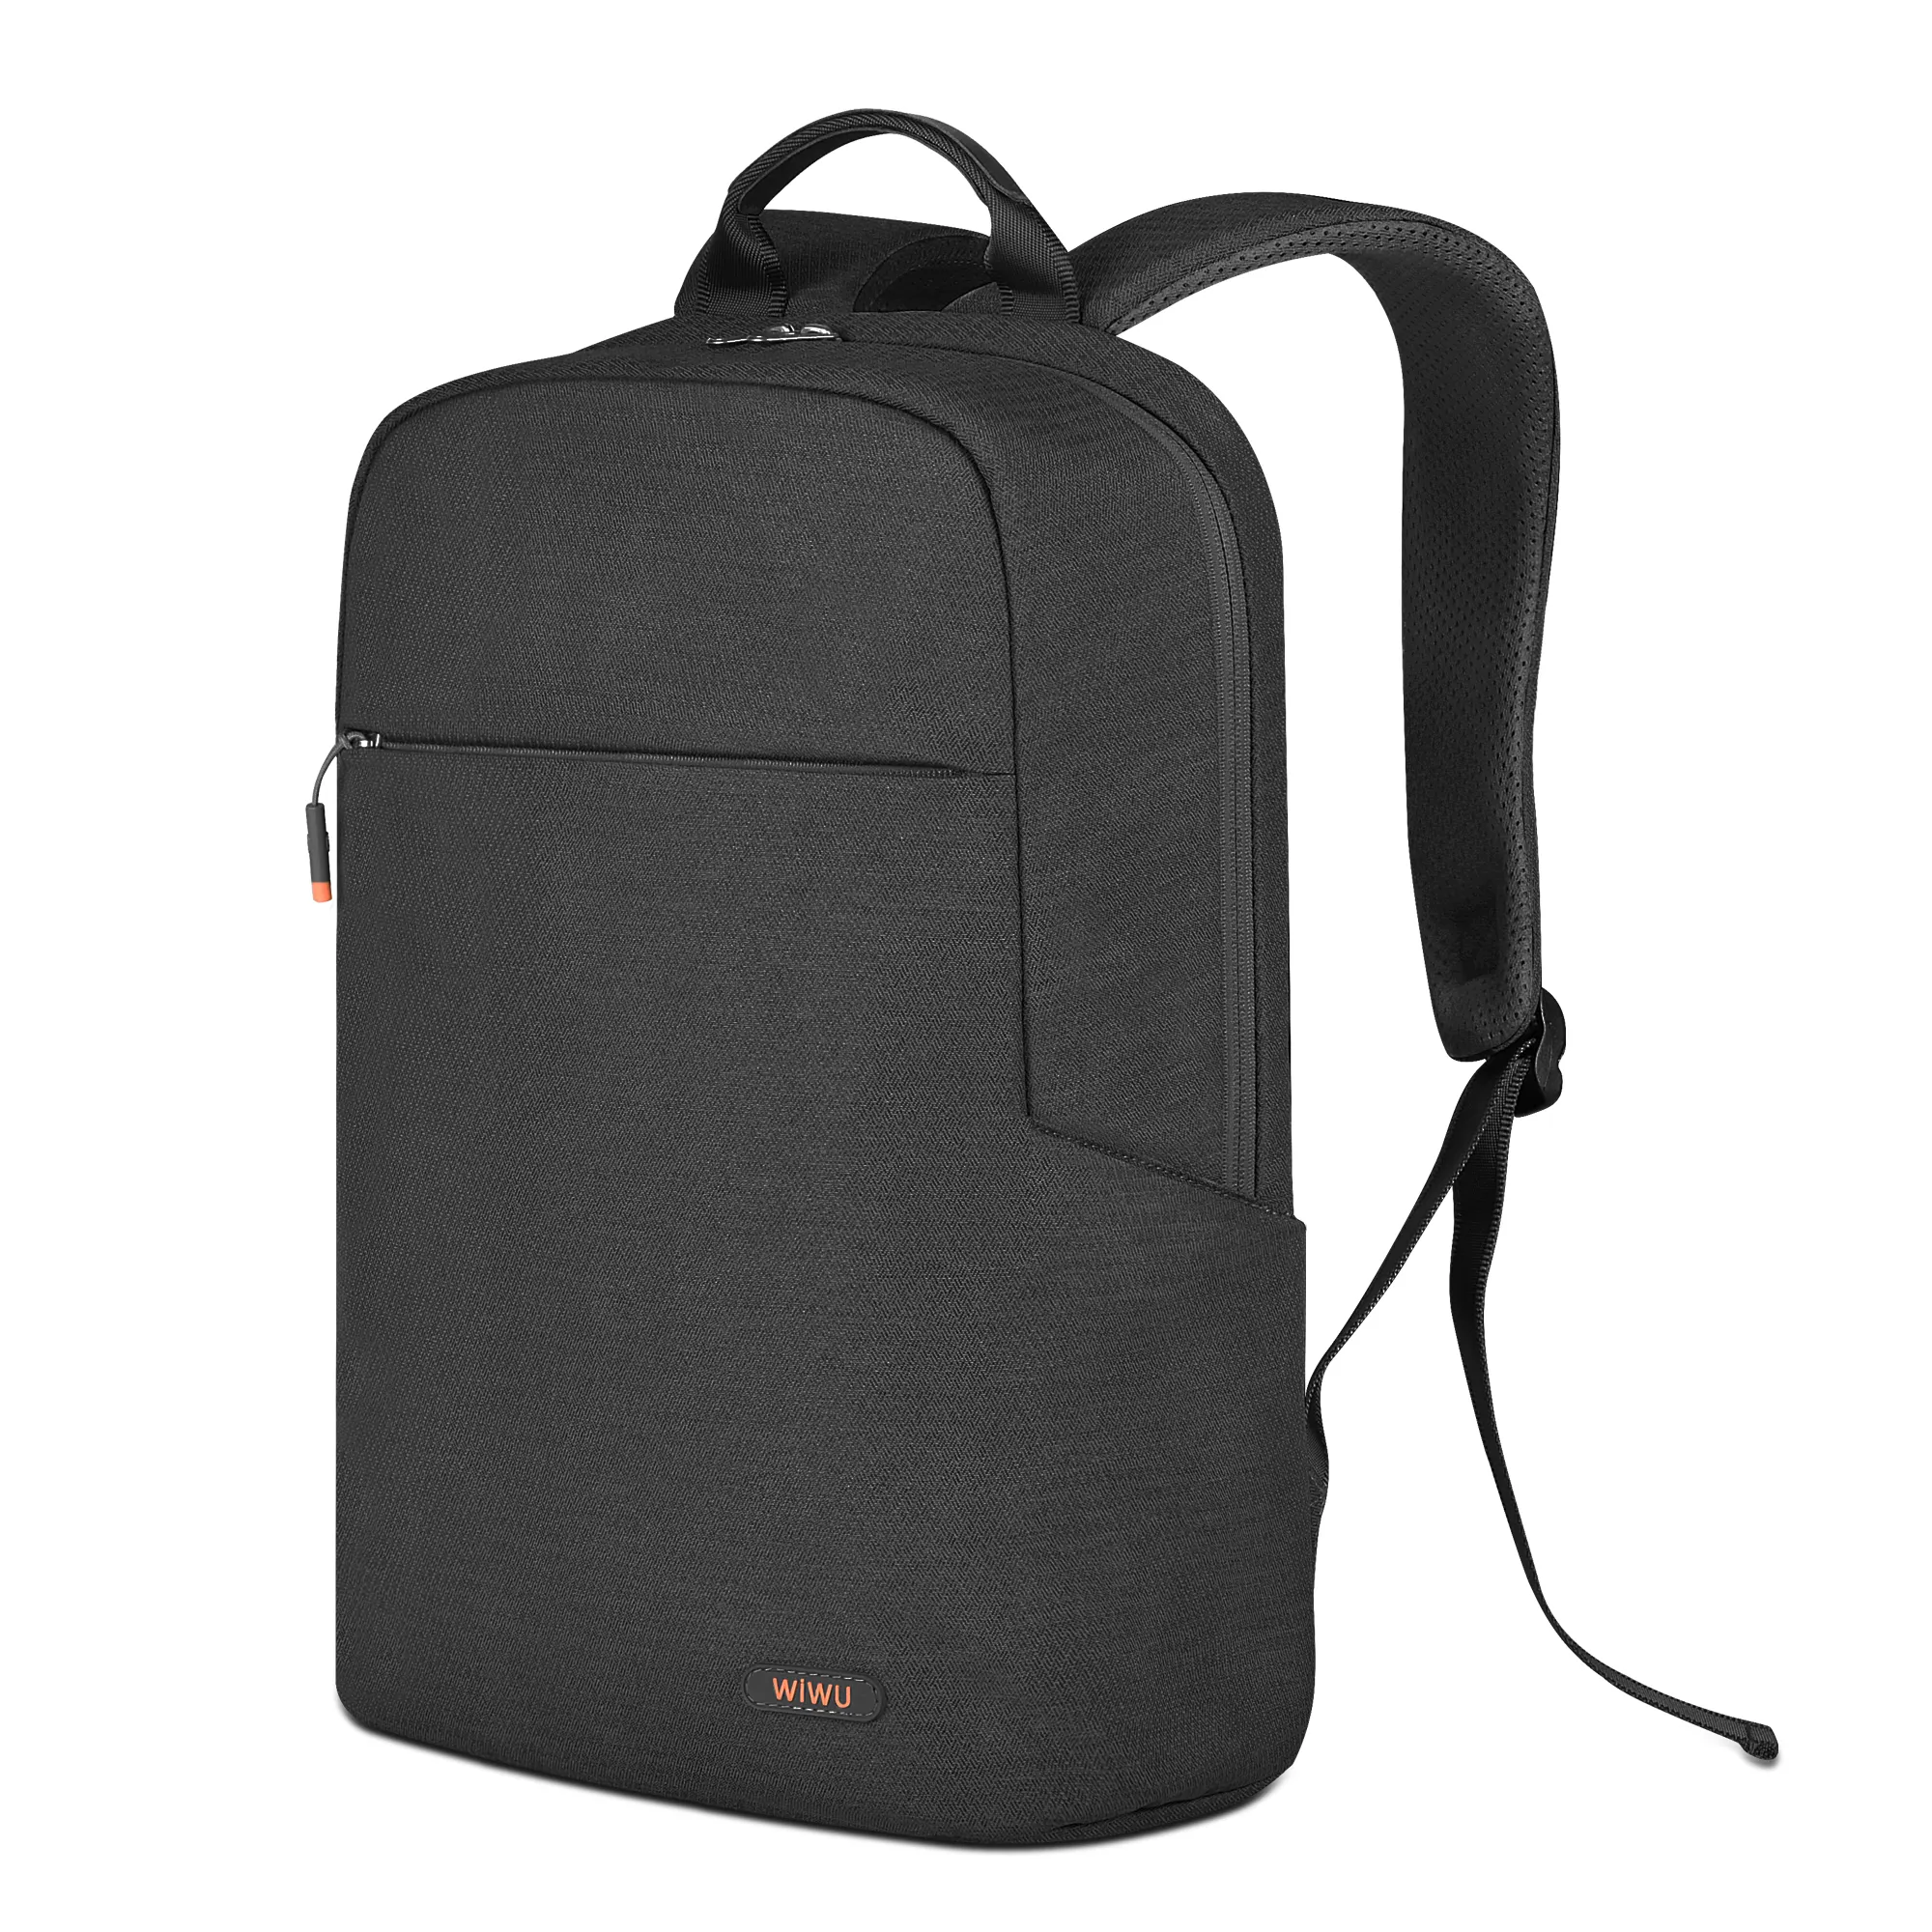 WIWU Wholesale Backpack Fashion Anti-theft USB Charge Waterproof Men's Business Backpack Back Laptop Pack Bags